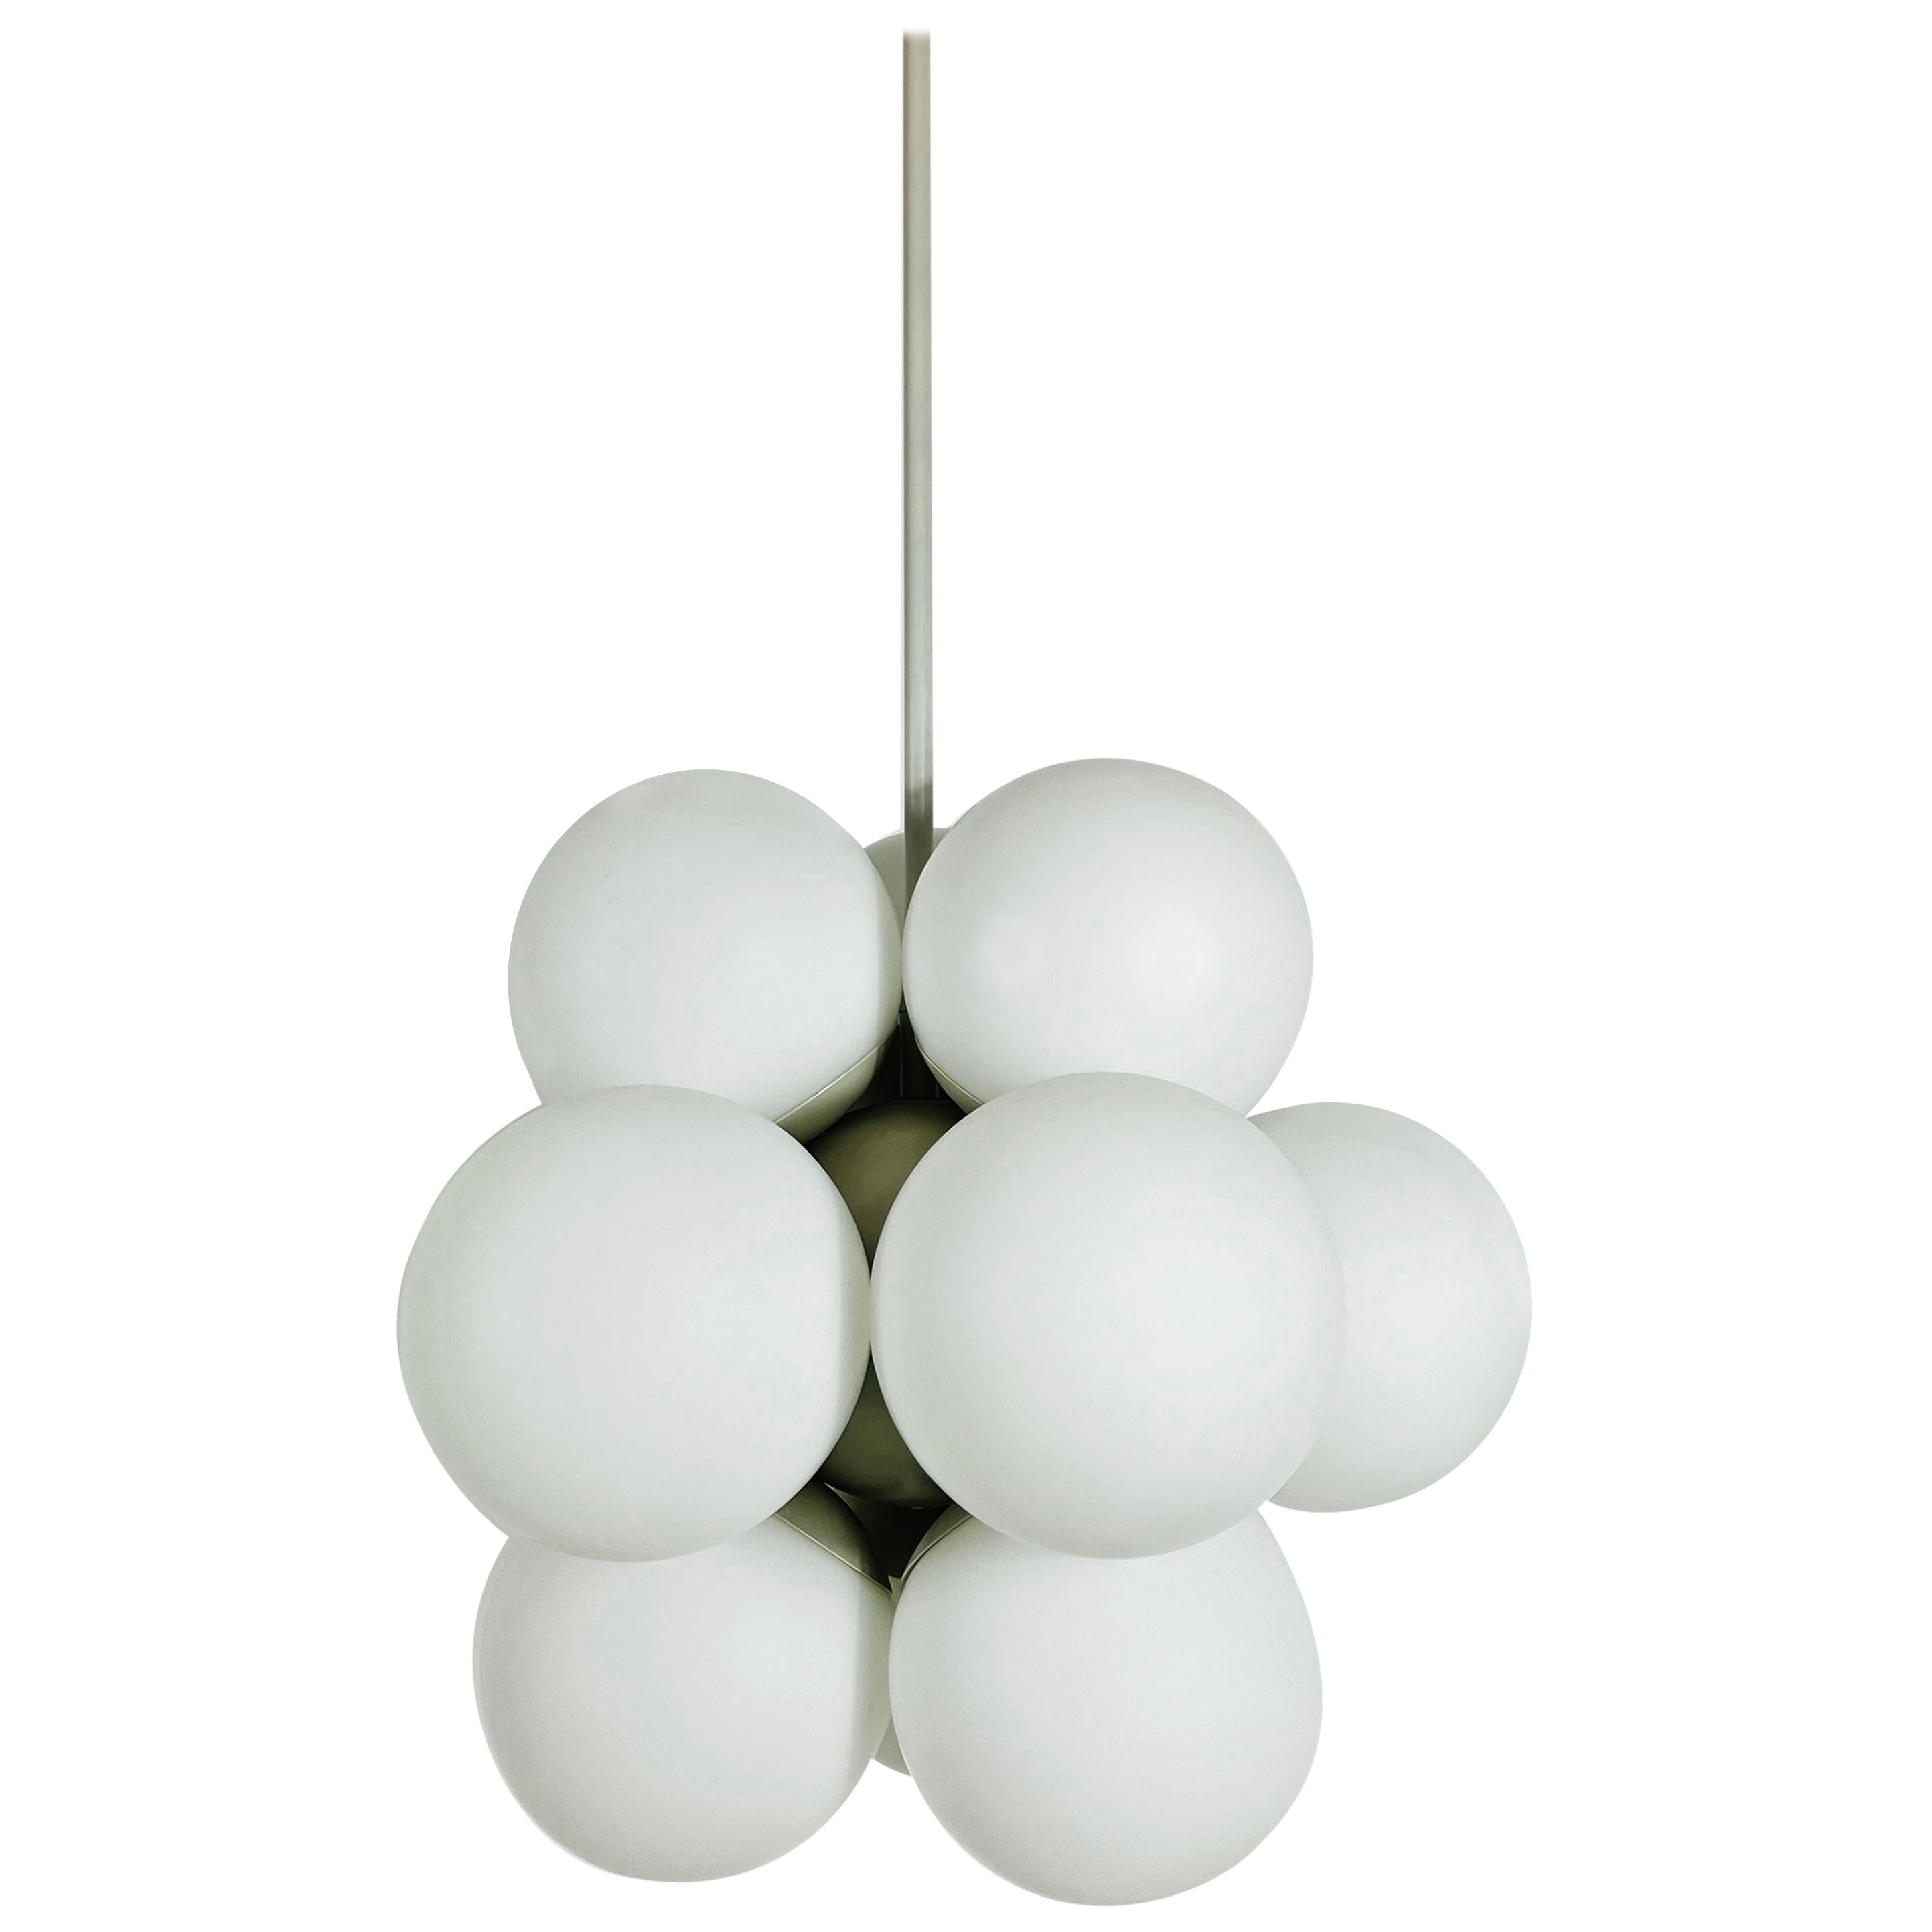 Atomic Kaiser Midcentury White 12- Arm Space Age Chandelier, 1960s, Germany For Sale